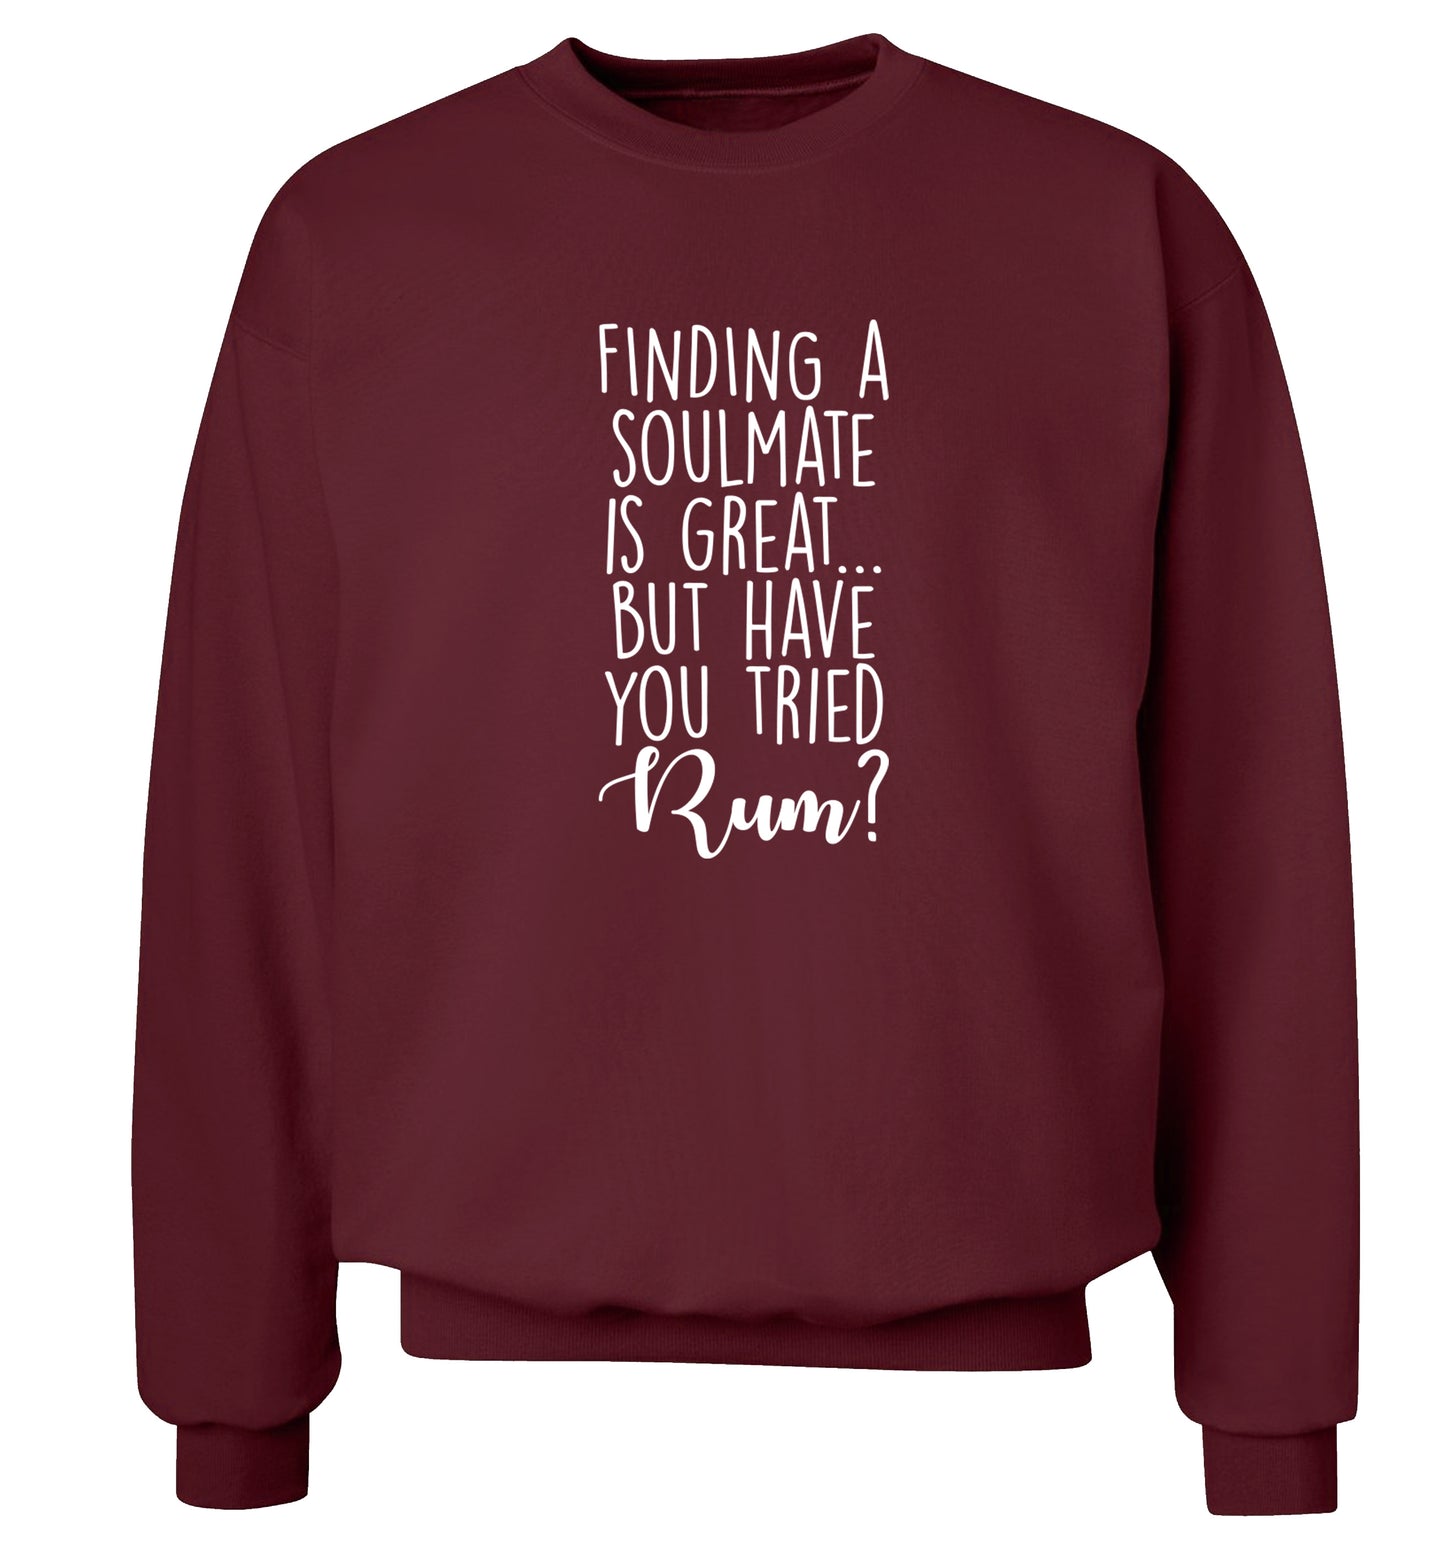 Finding a soulmate is great but have you tried rum? Adult's unisex maroon Sweater 2XL